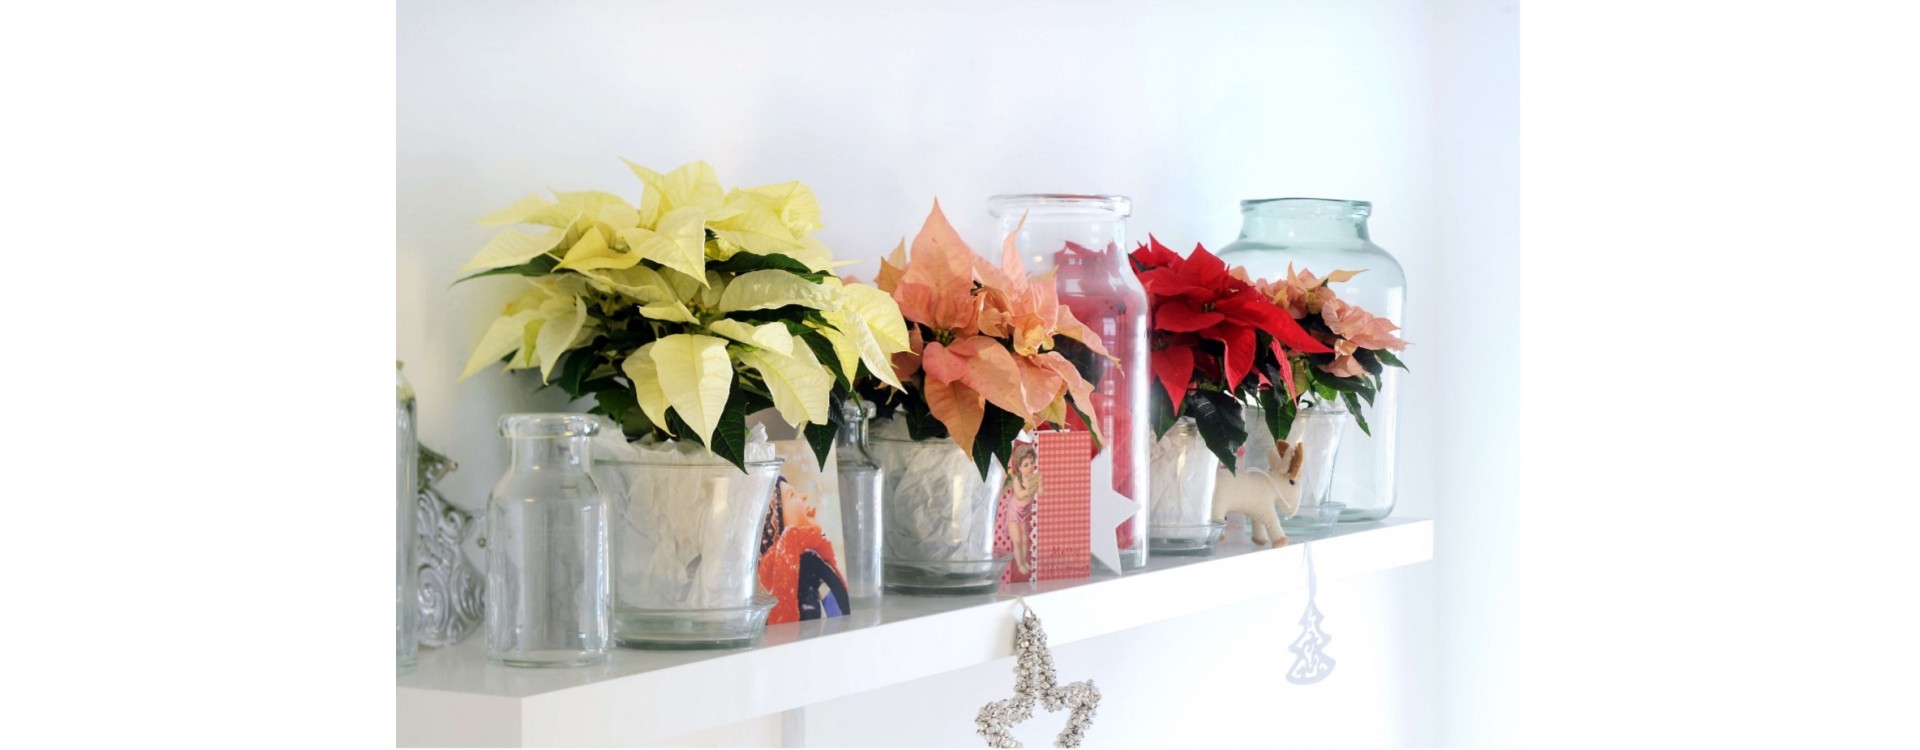 Poinsettia: how to care for the Christmas Star?